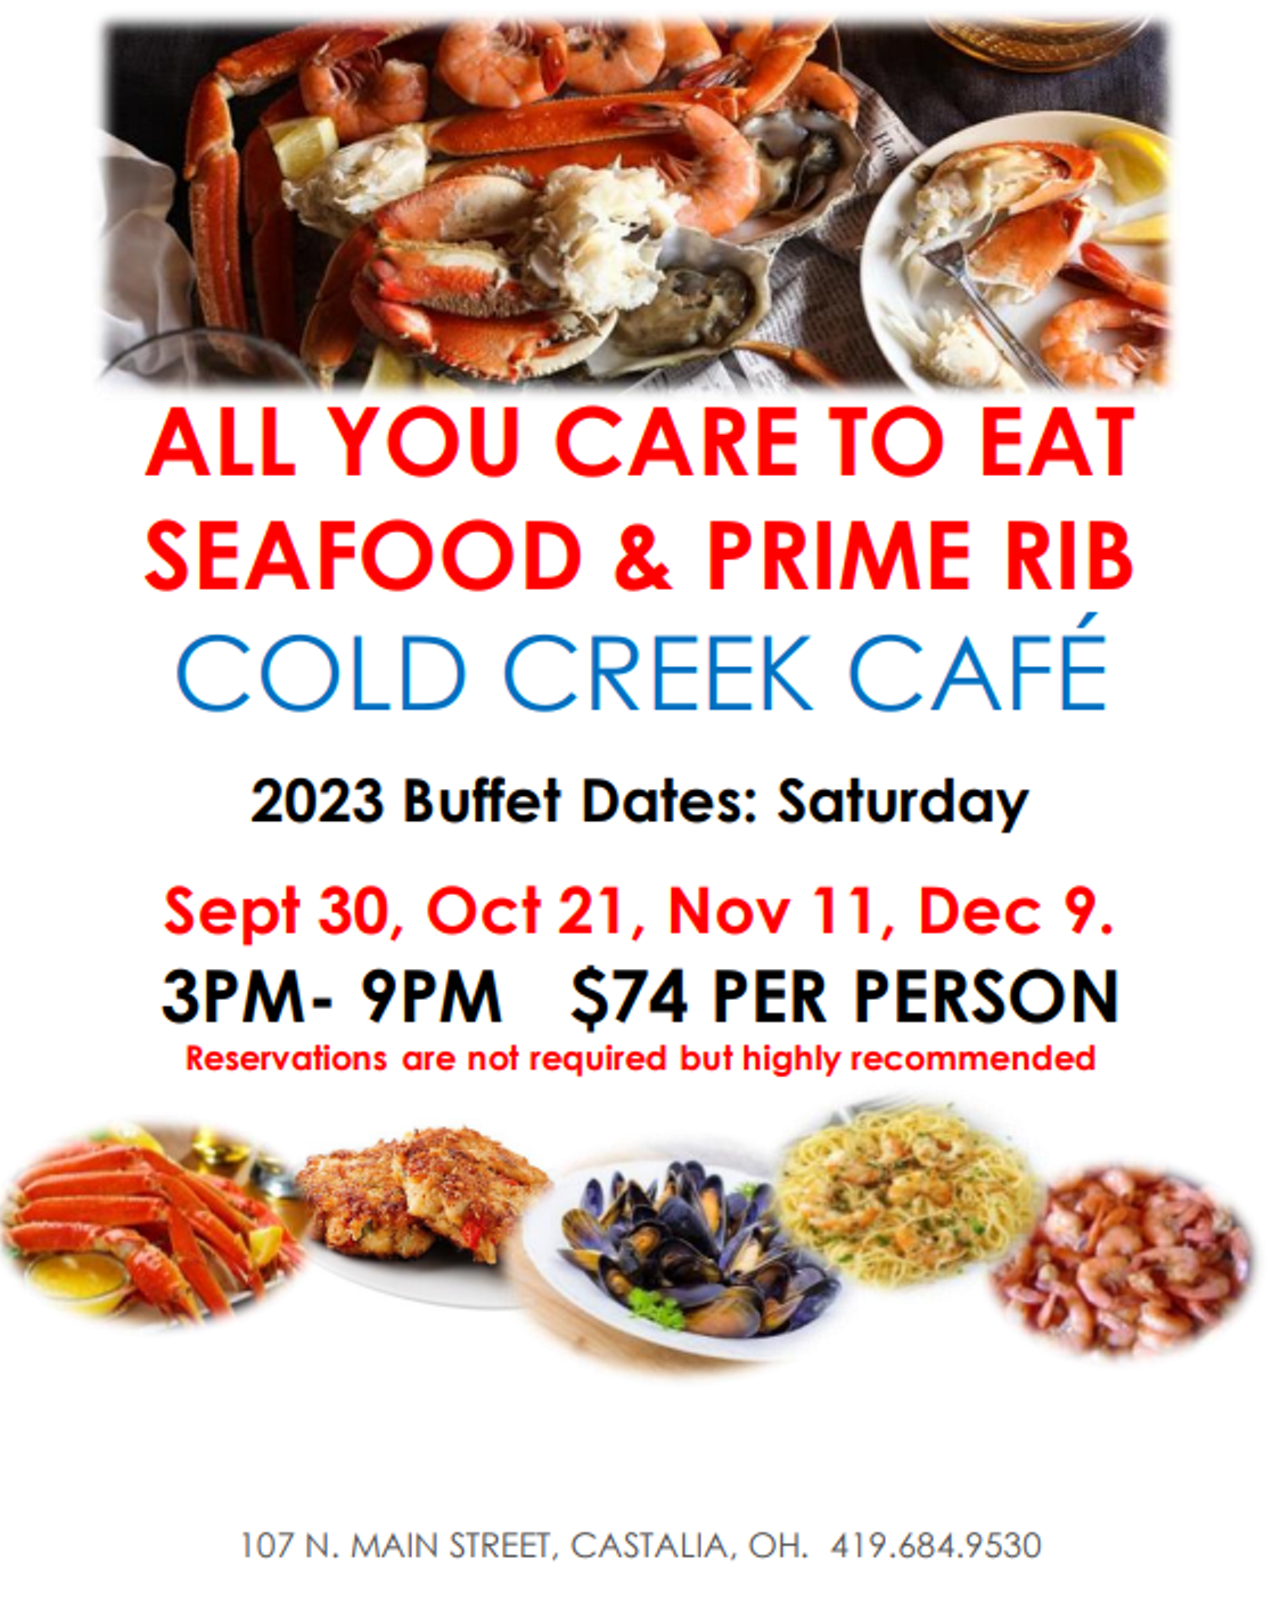 All You Care to Eat Seafood and Prime Rib Buffet Cold Creek Cafe Food/Drink Cleveland Scene